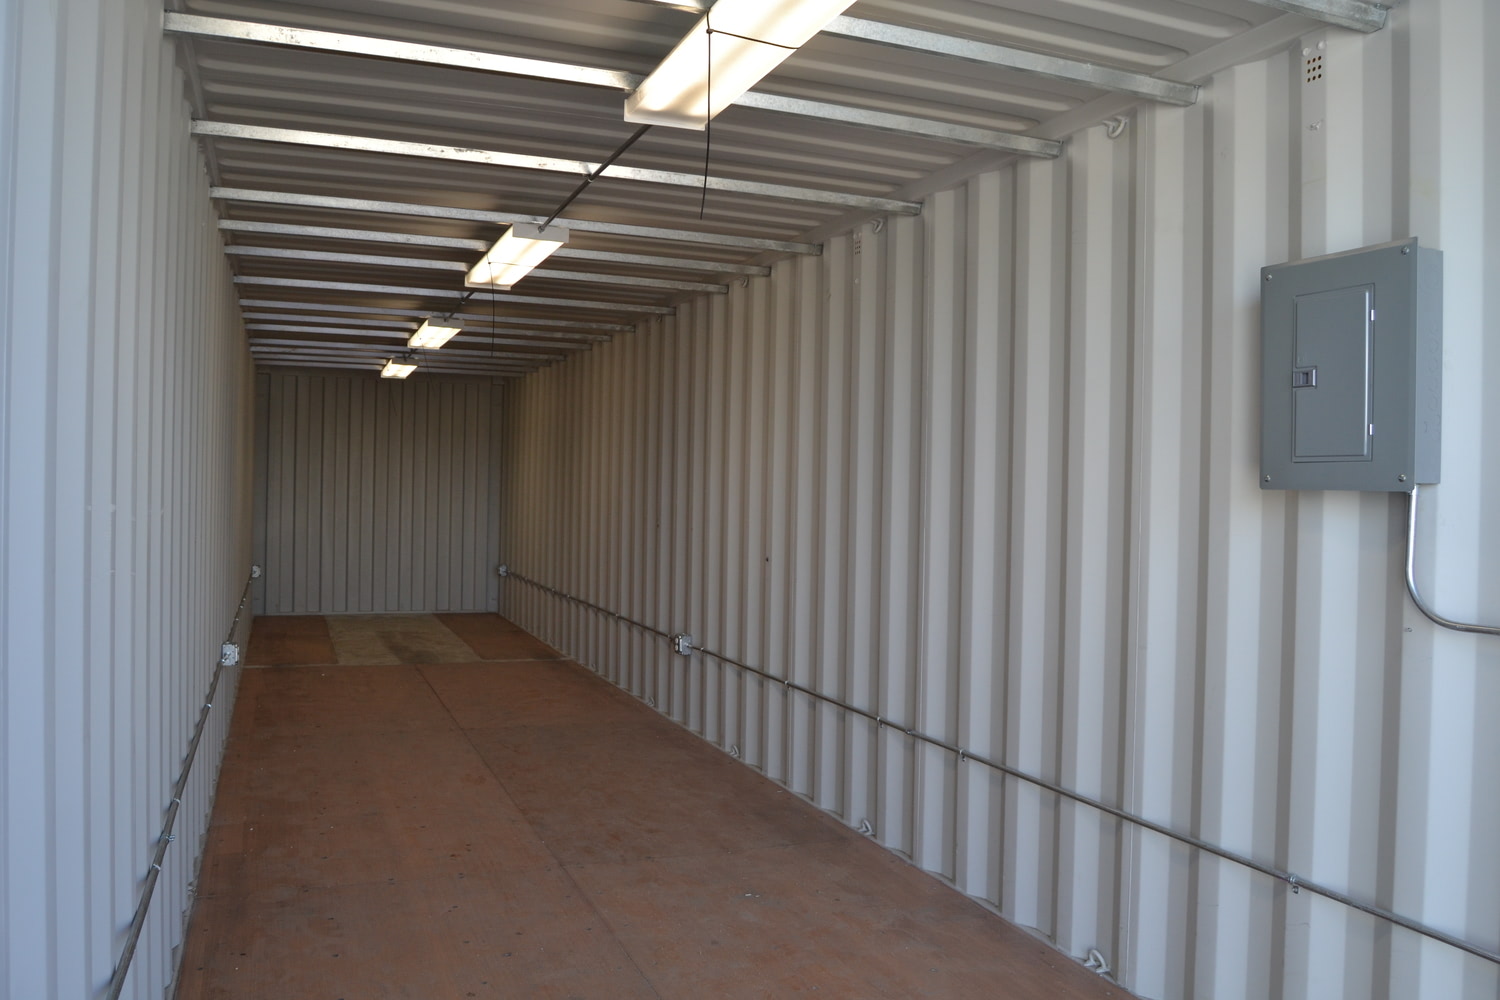 Interior of shipping container modified into portable storage shed.